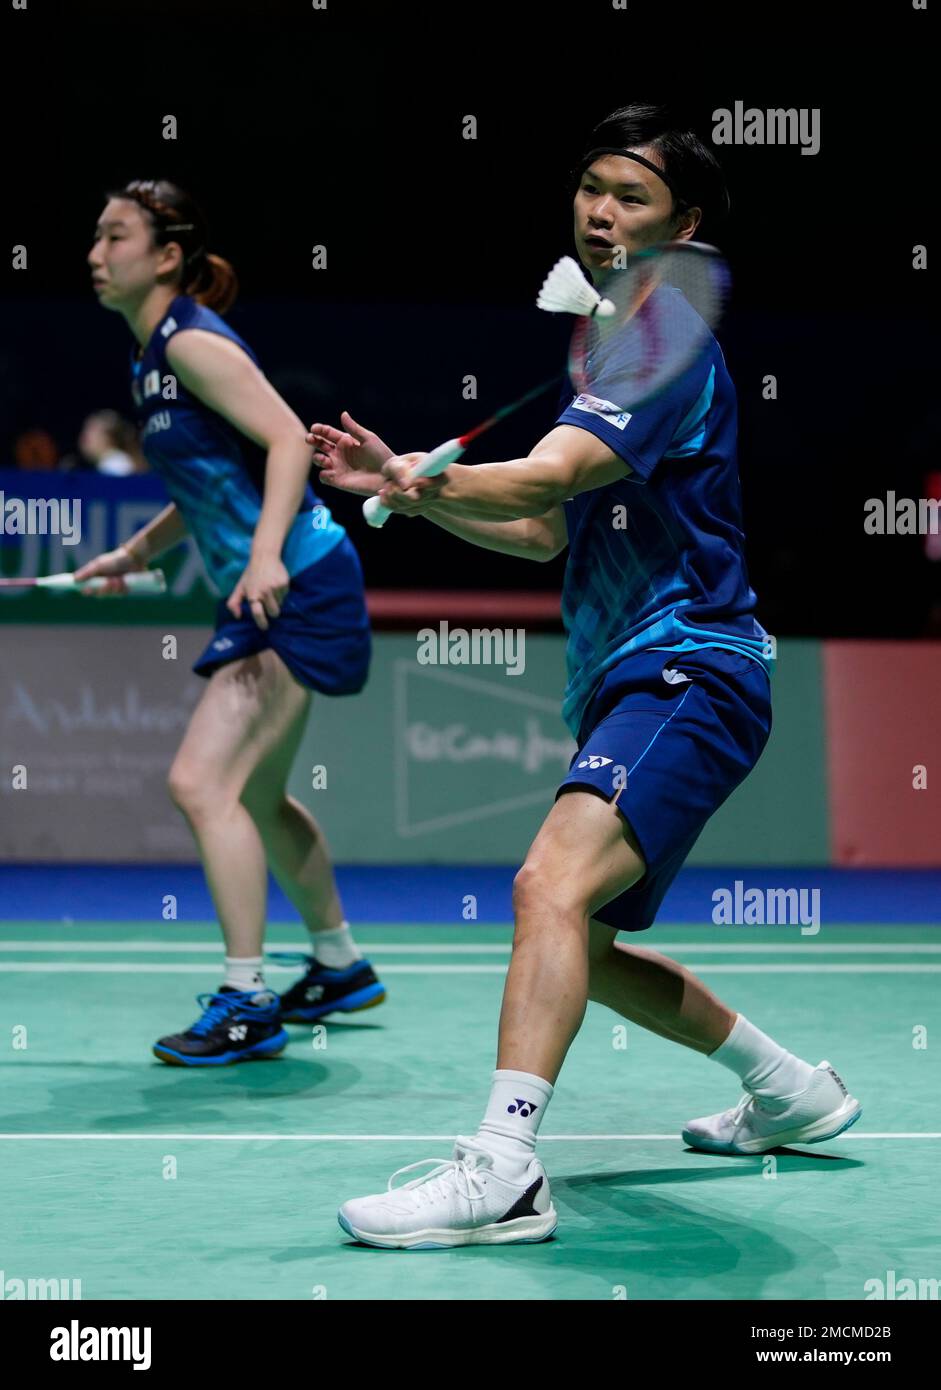 Yuta Watanabe of Japan, right, playing alongside Arisa Higashini returns to  the national Russian Federation players Evhenij Dremin and Evenia Dimova  during their mixed badminton match at the BWF World Championships in